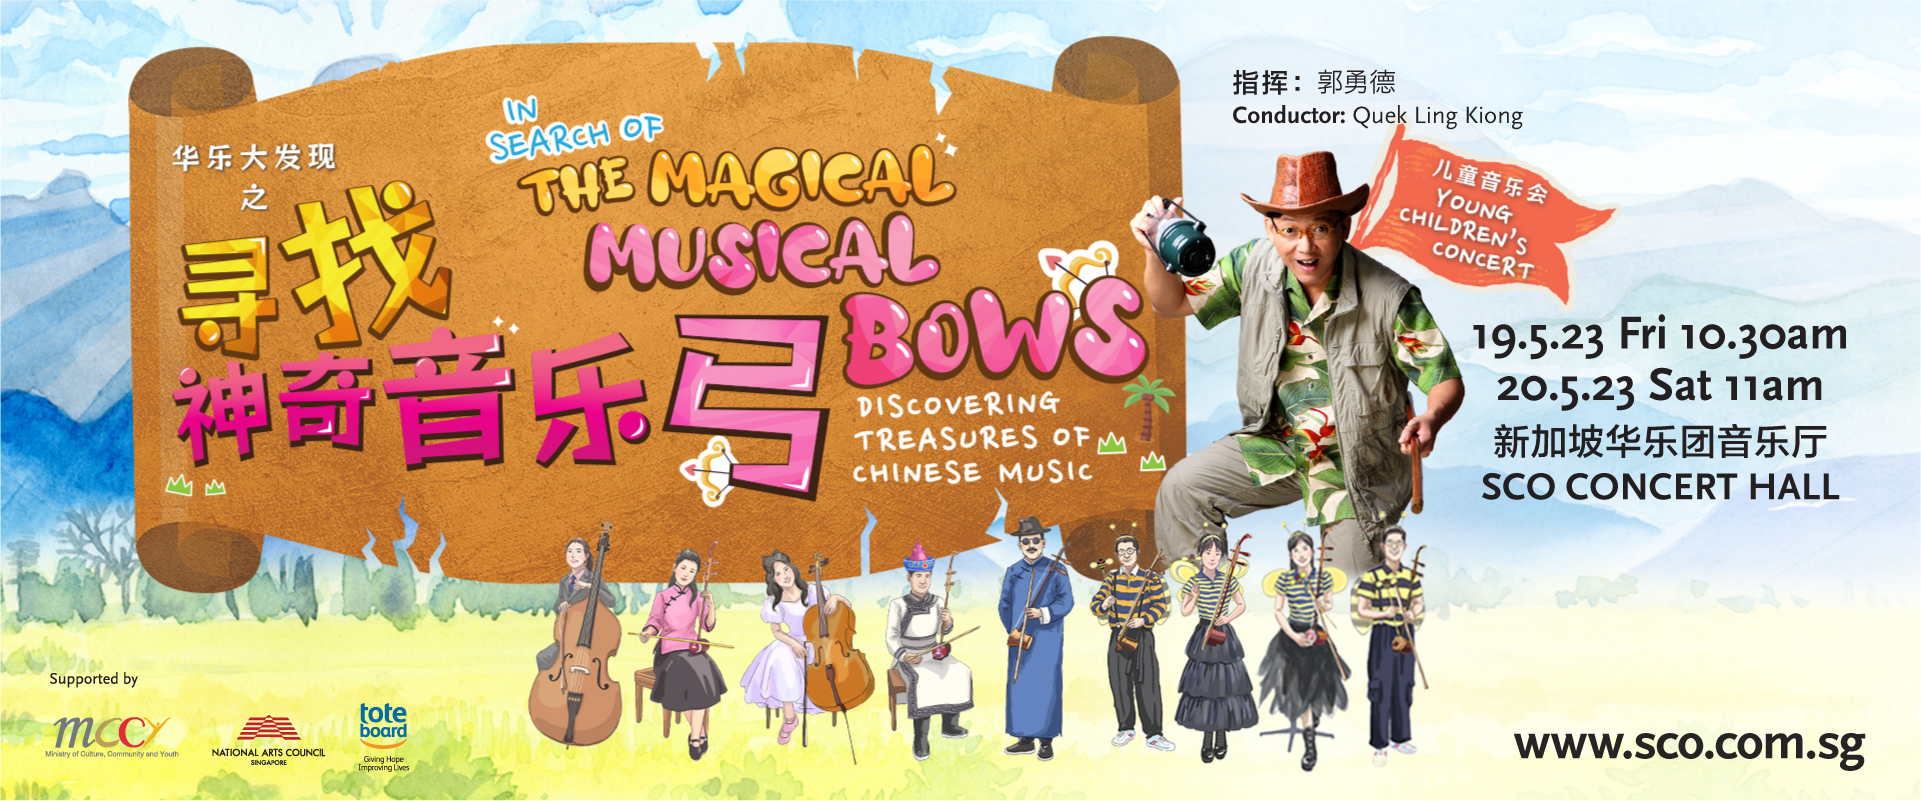 YCC_MusicalBows_Homepage_Website_1920x800_desktop Young Children's Concert 2023 DiSCOvering Treasures of Chinese Music – In Search of the Magical Musical Bows